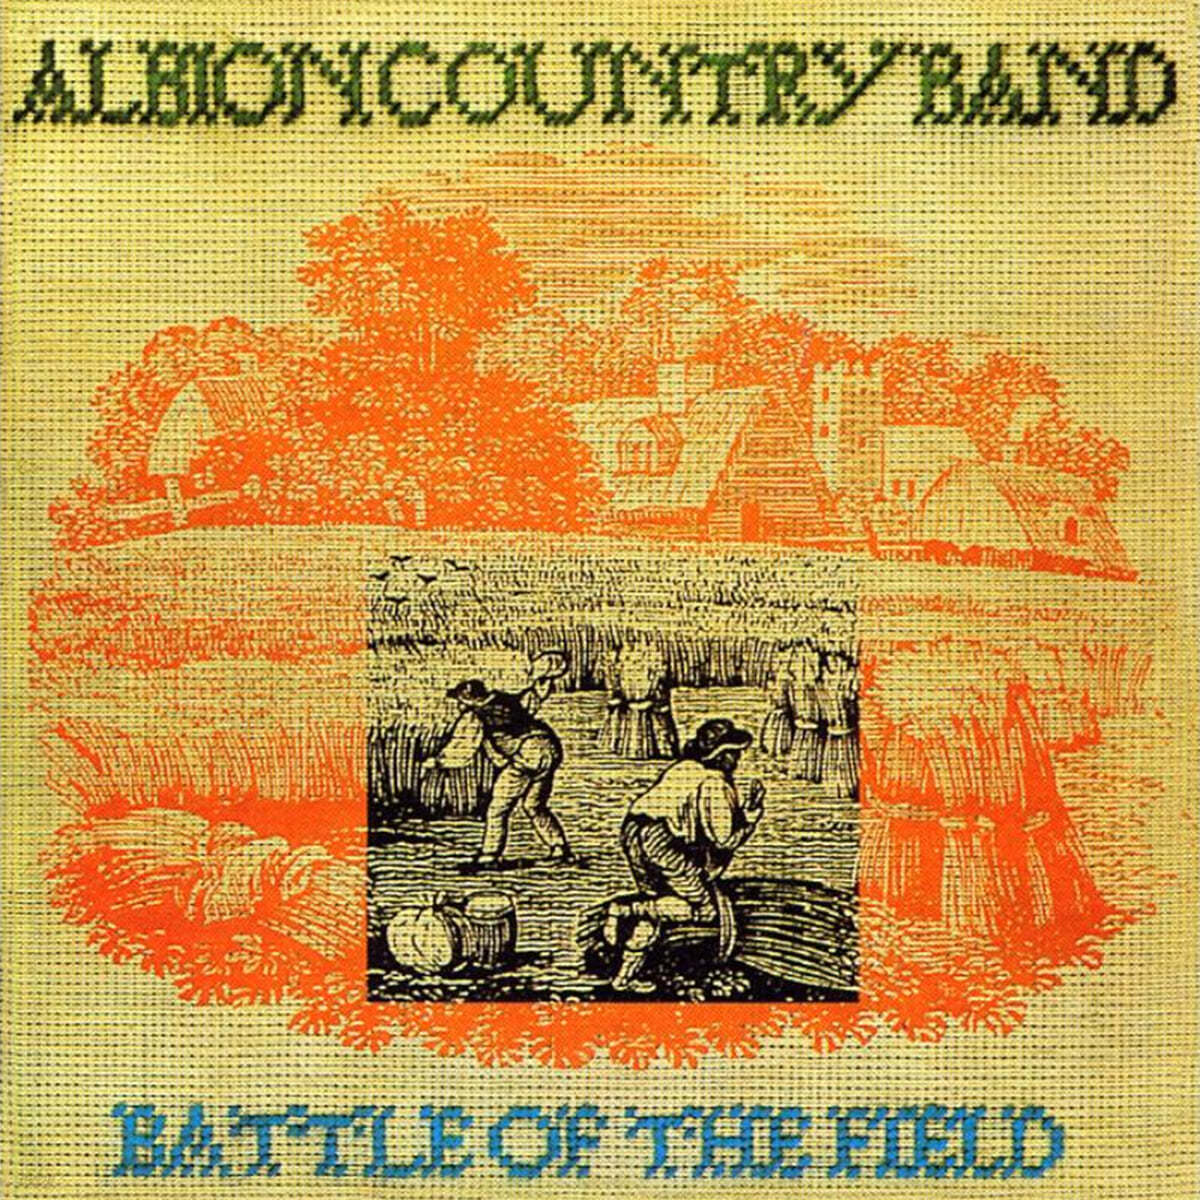 The Albion Country Band - Battle Of The Field